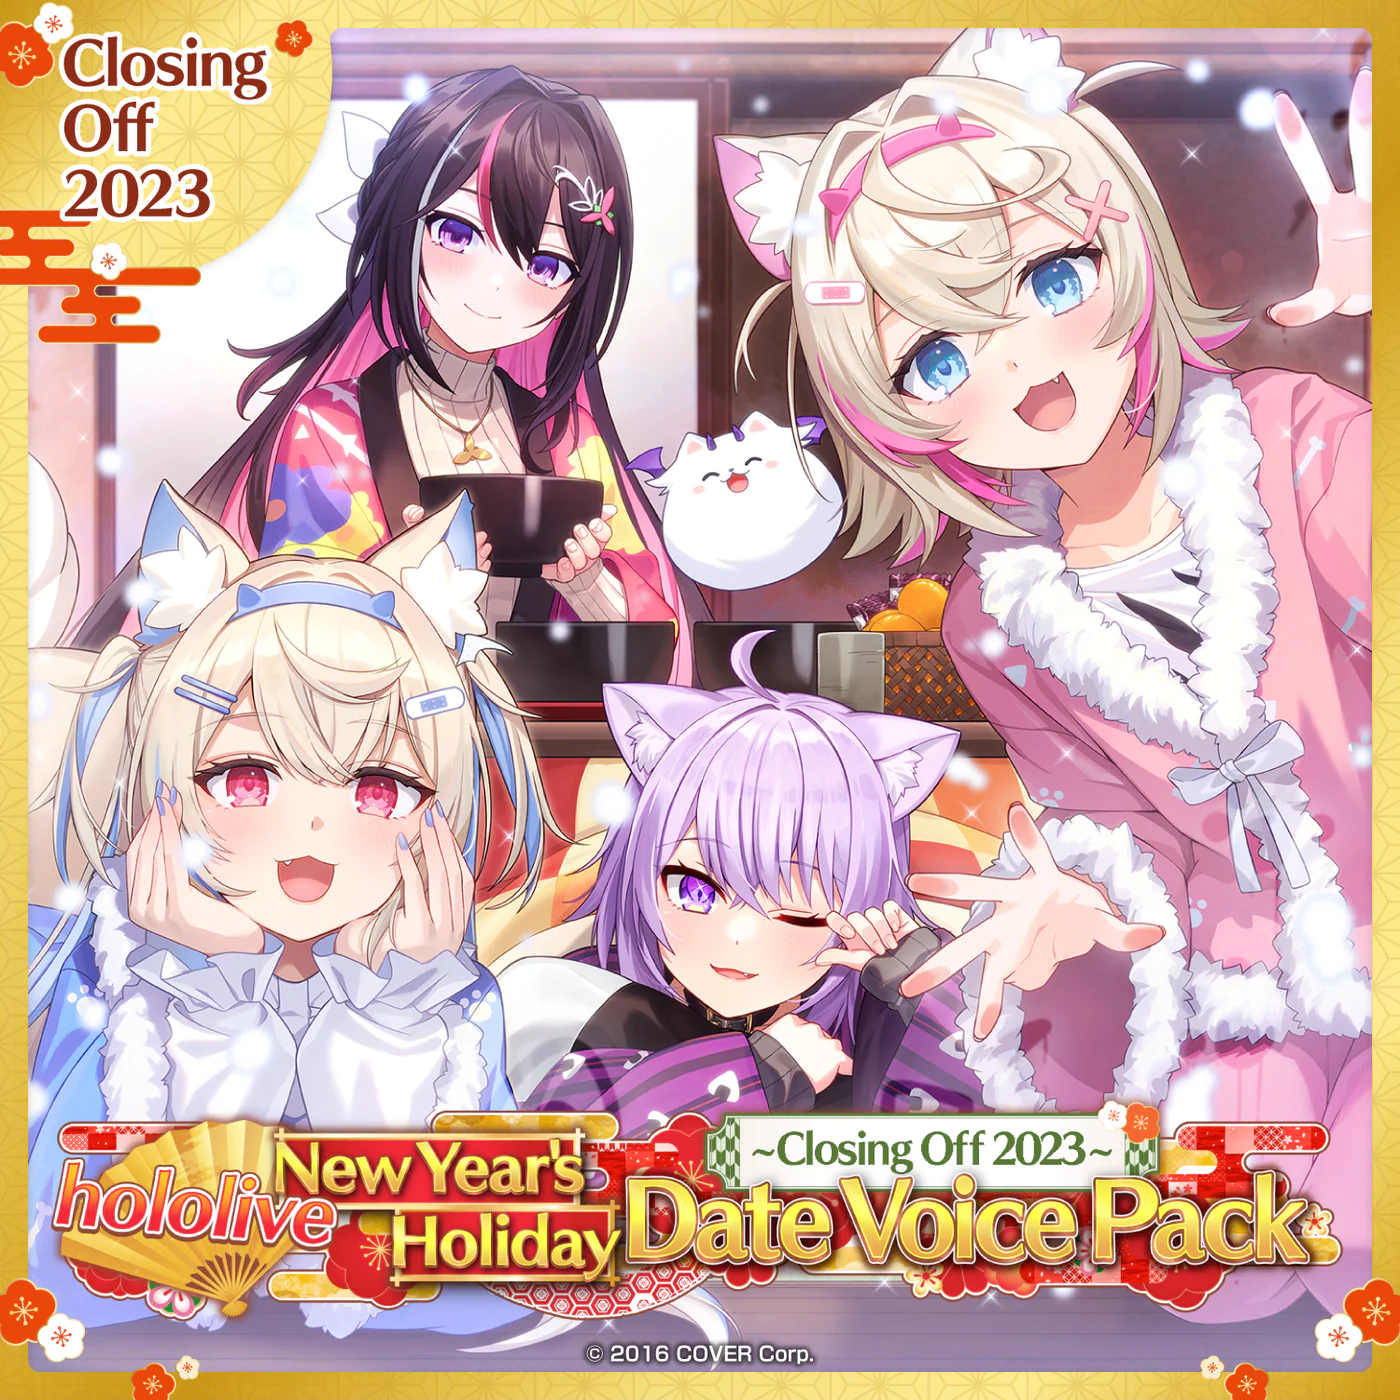 [In Stock] hololive New Year's Holiday Date Voice Pack ~Closing Off 2023~ Japan